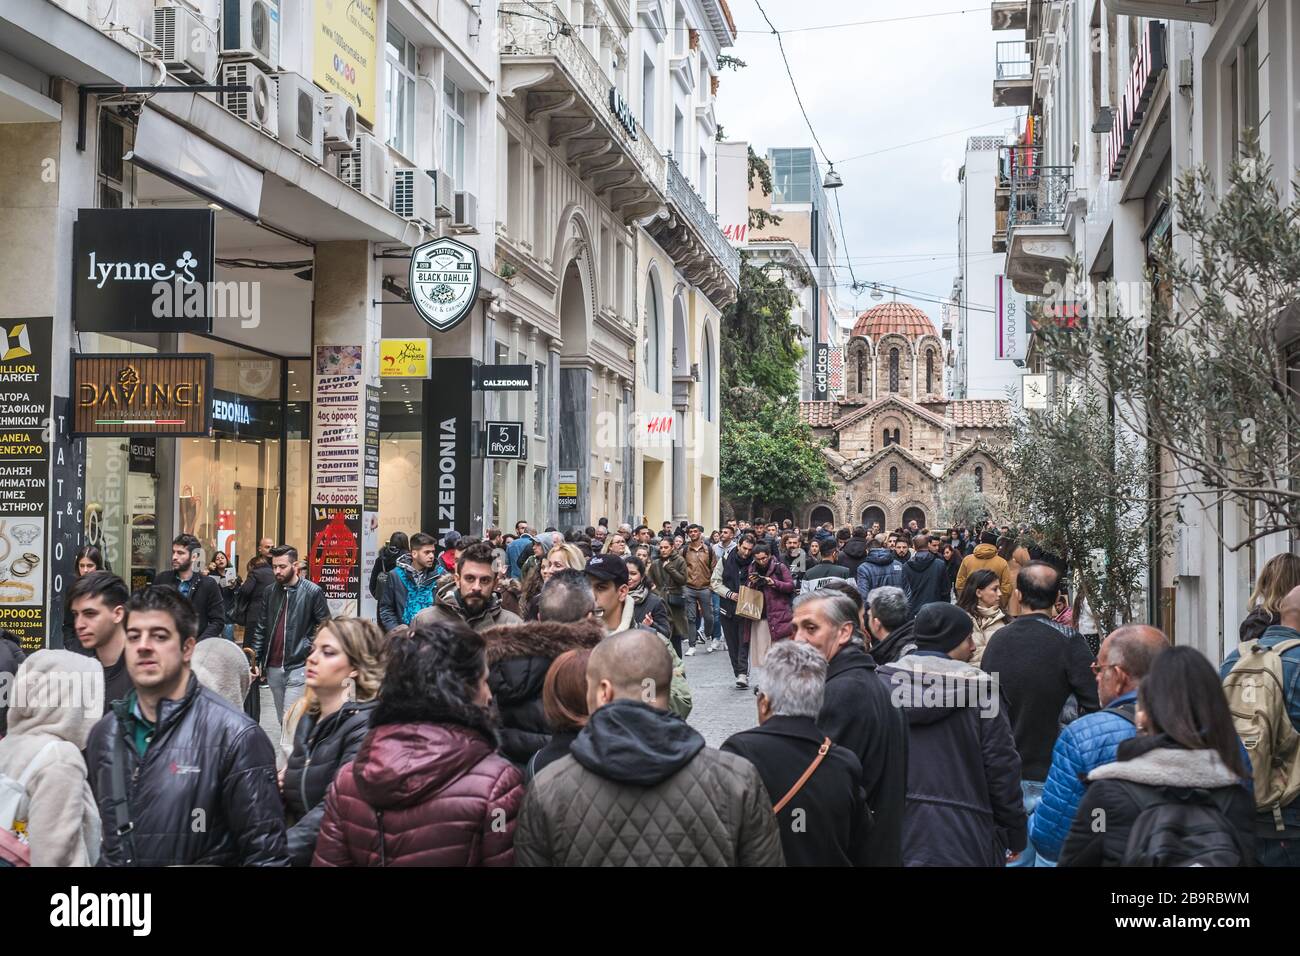 Athens, Greece - February 15, 2020. people walking the most famous street in Athens with luxury shops, Ermou street Stock Photo